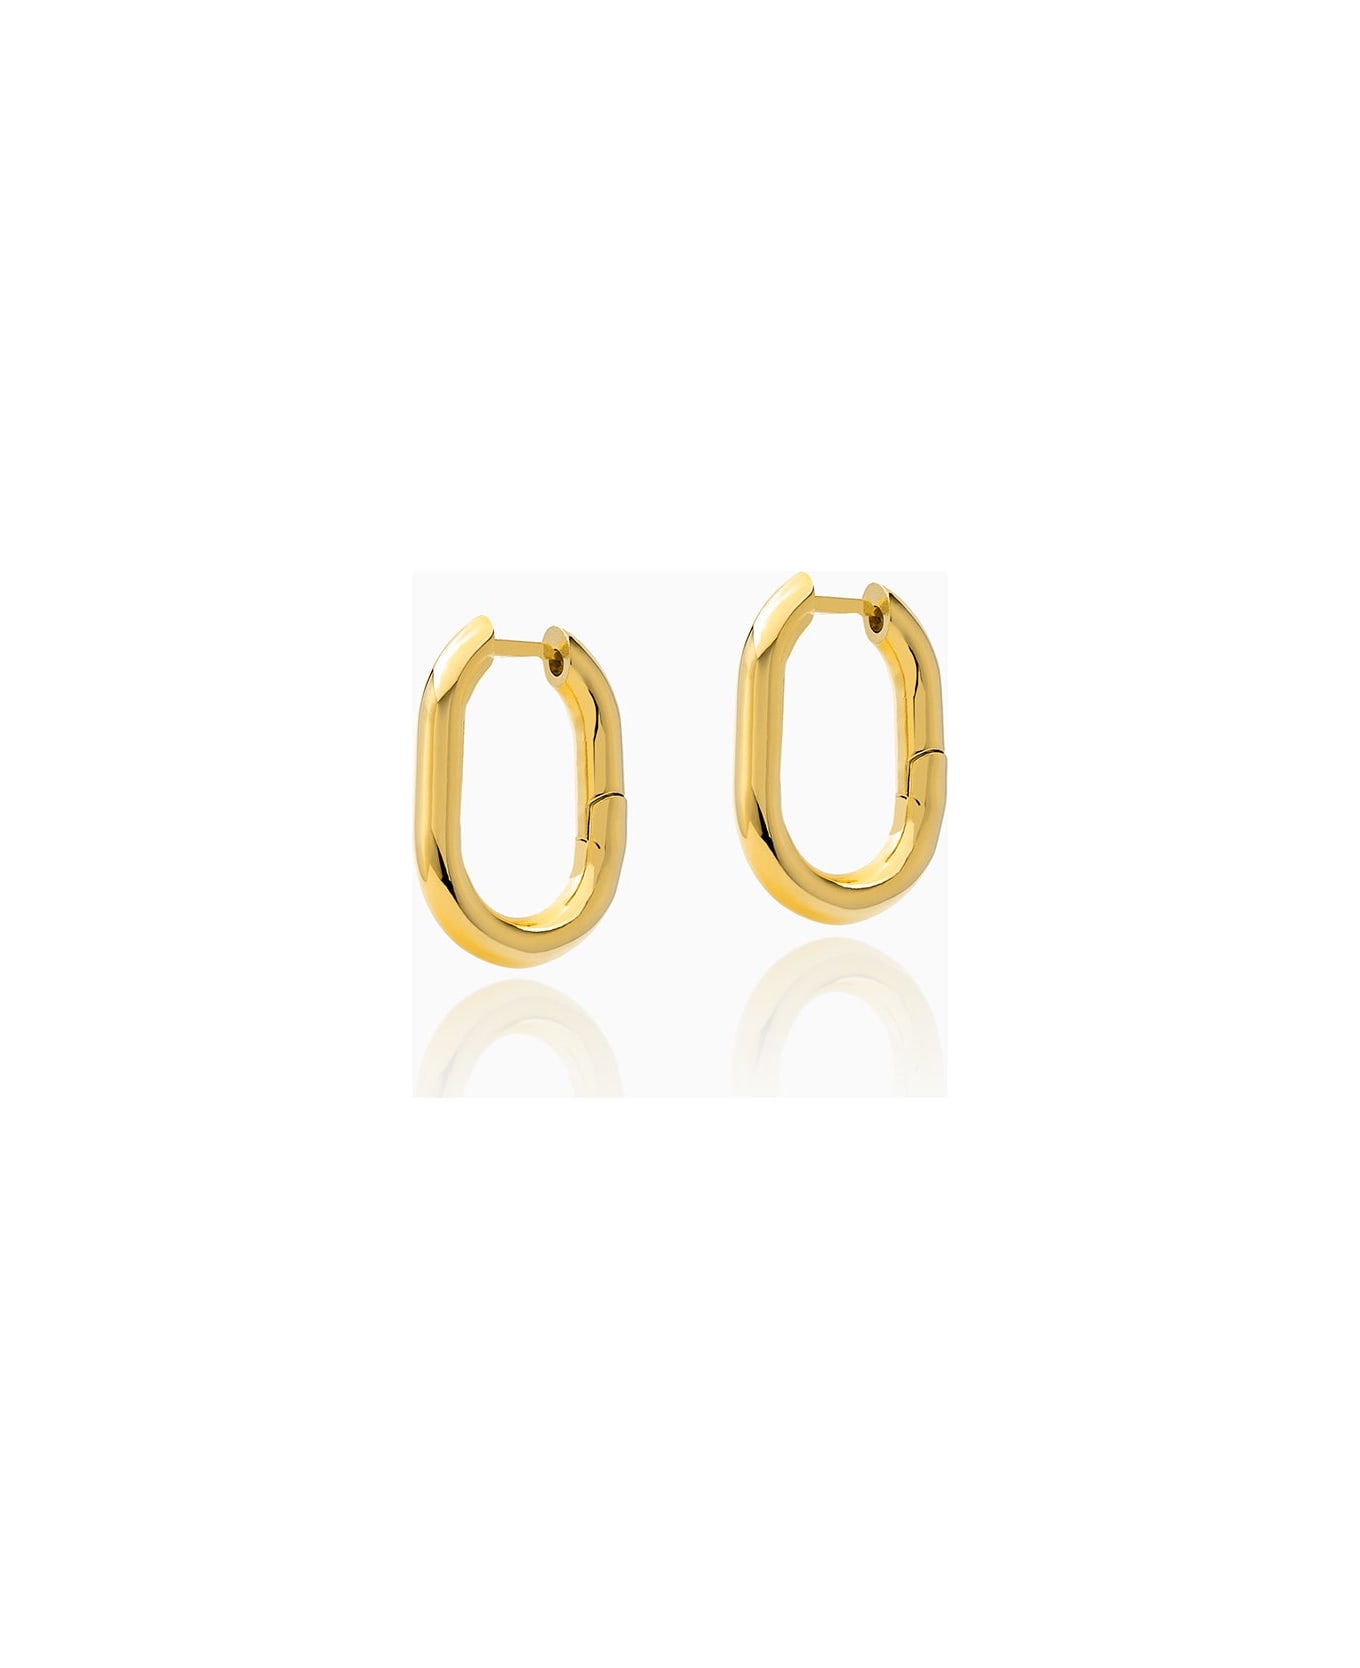 Federica Tosi Earring Christy Gold - GOLD